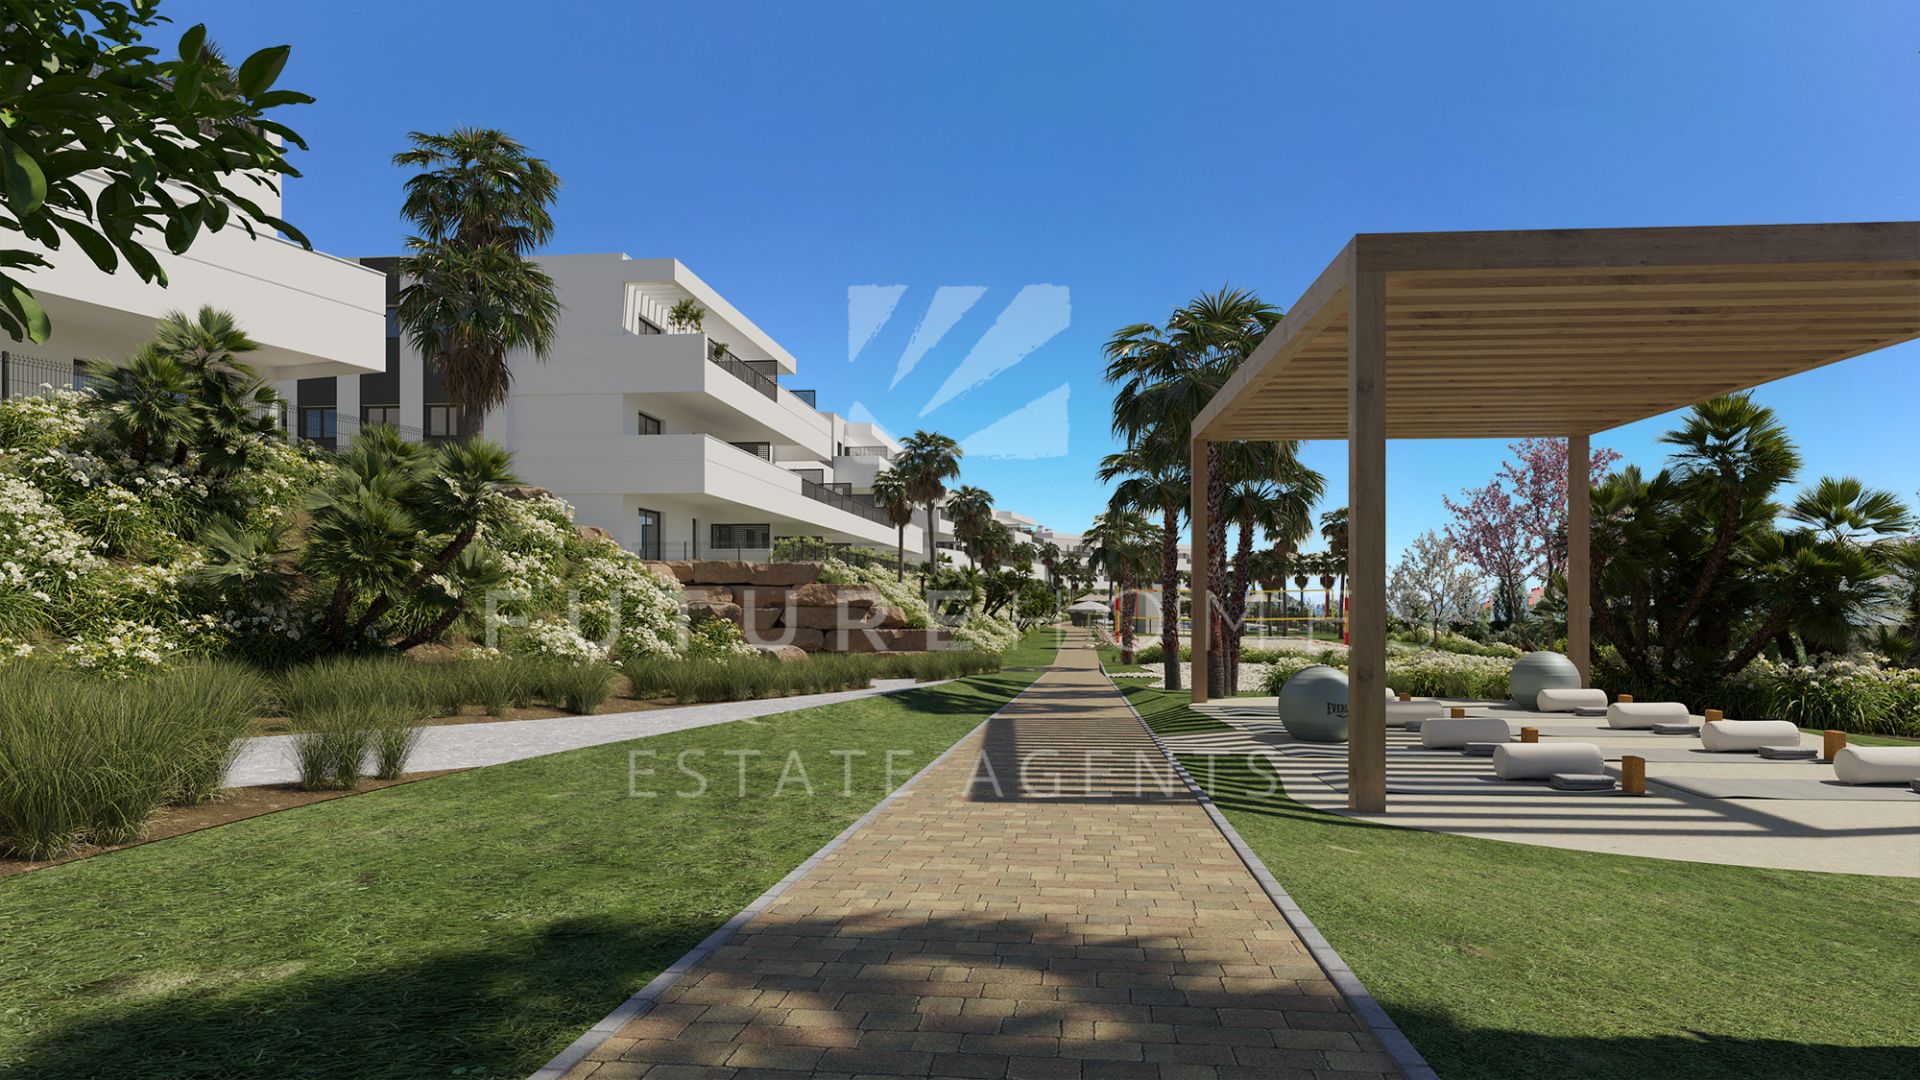 Brand new development only 10 minutes drive to Estepona town! Prices start from 199.000 euros!